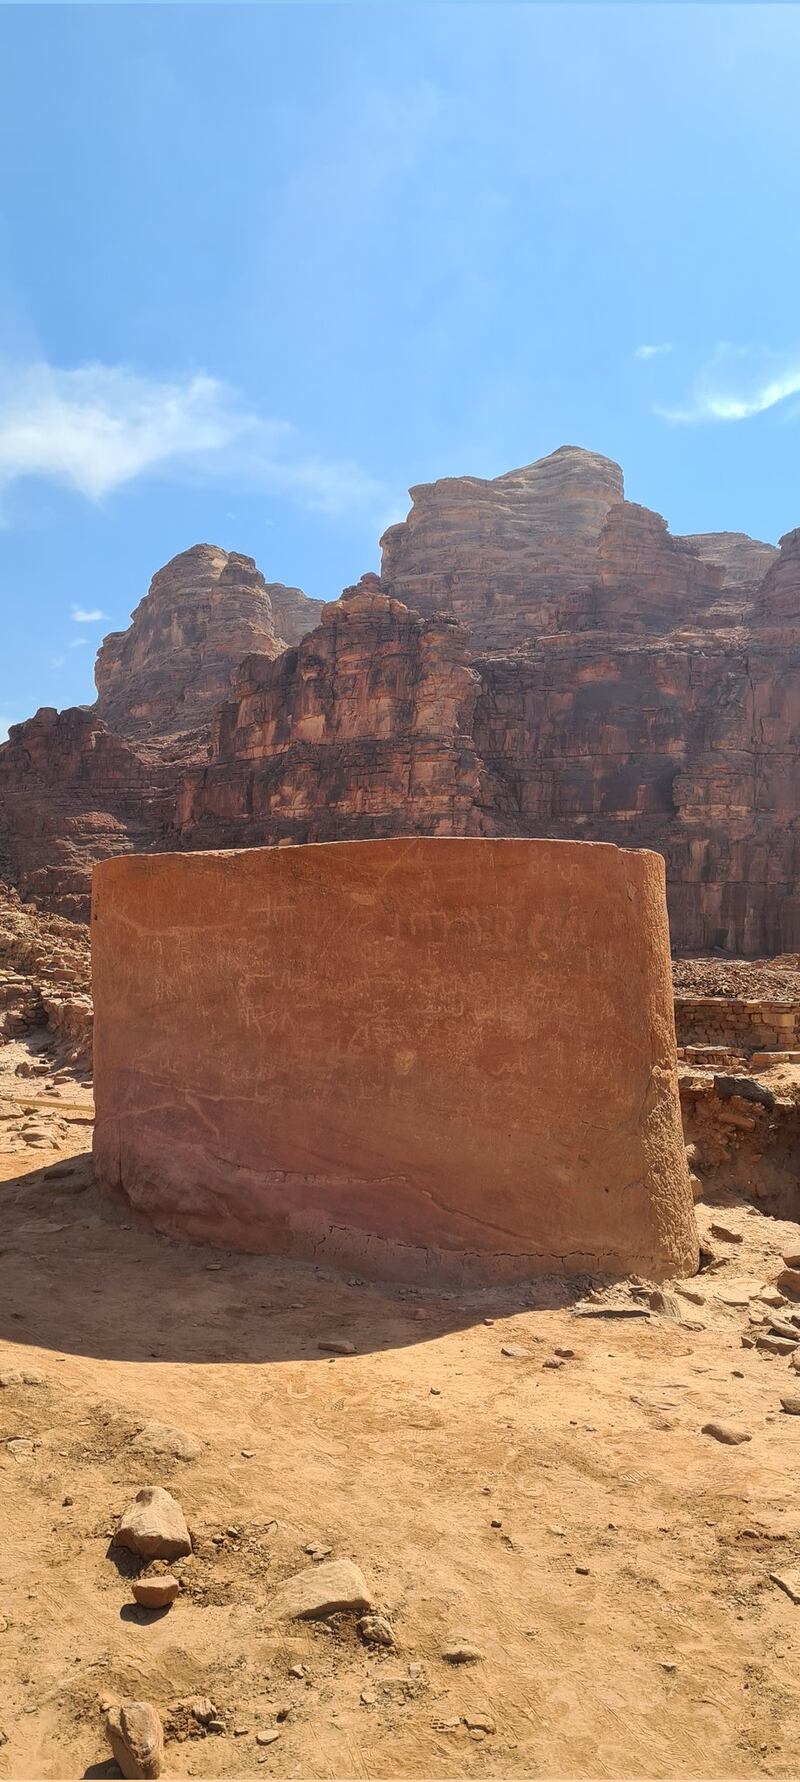 AlUla is said to be home to more than 30,000 sites of historical significance.